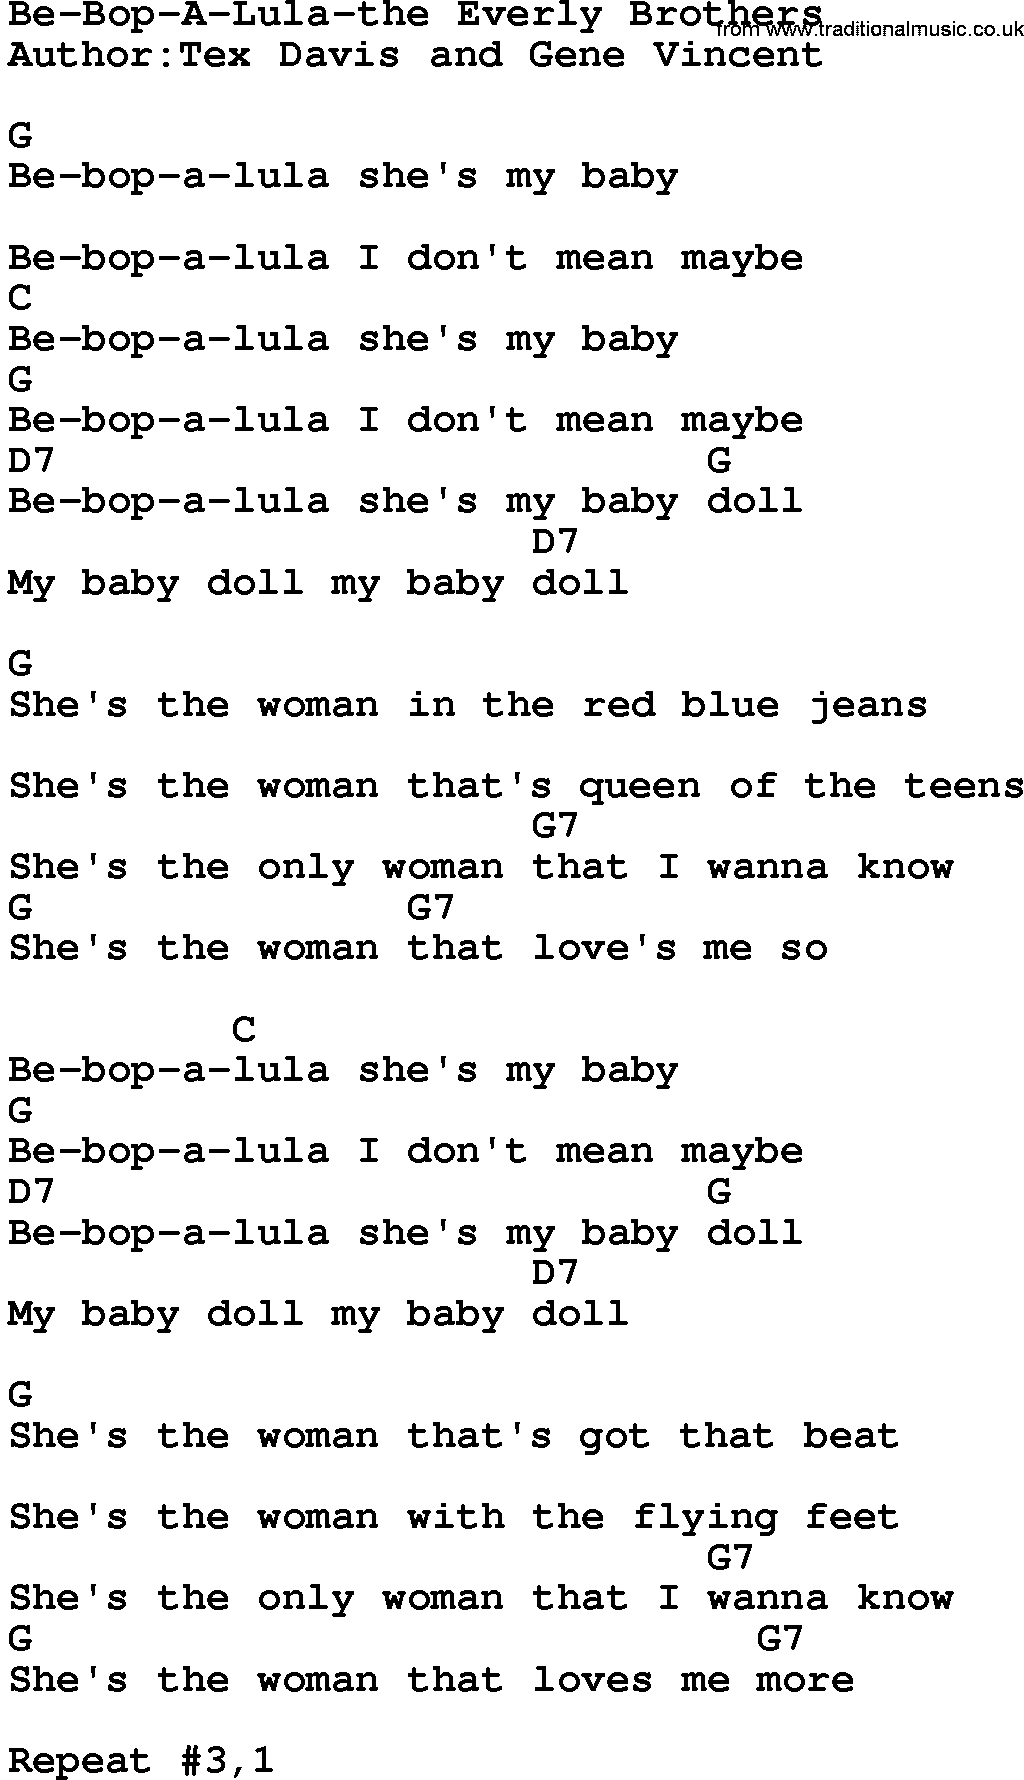 Country music song: Be-Bop-A-Lula-The Everly Brothers lyrics and chords